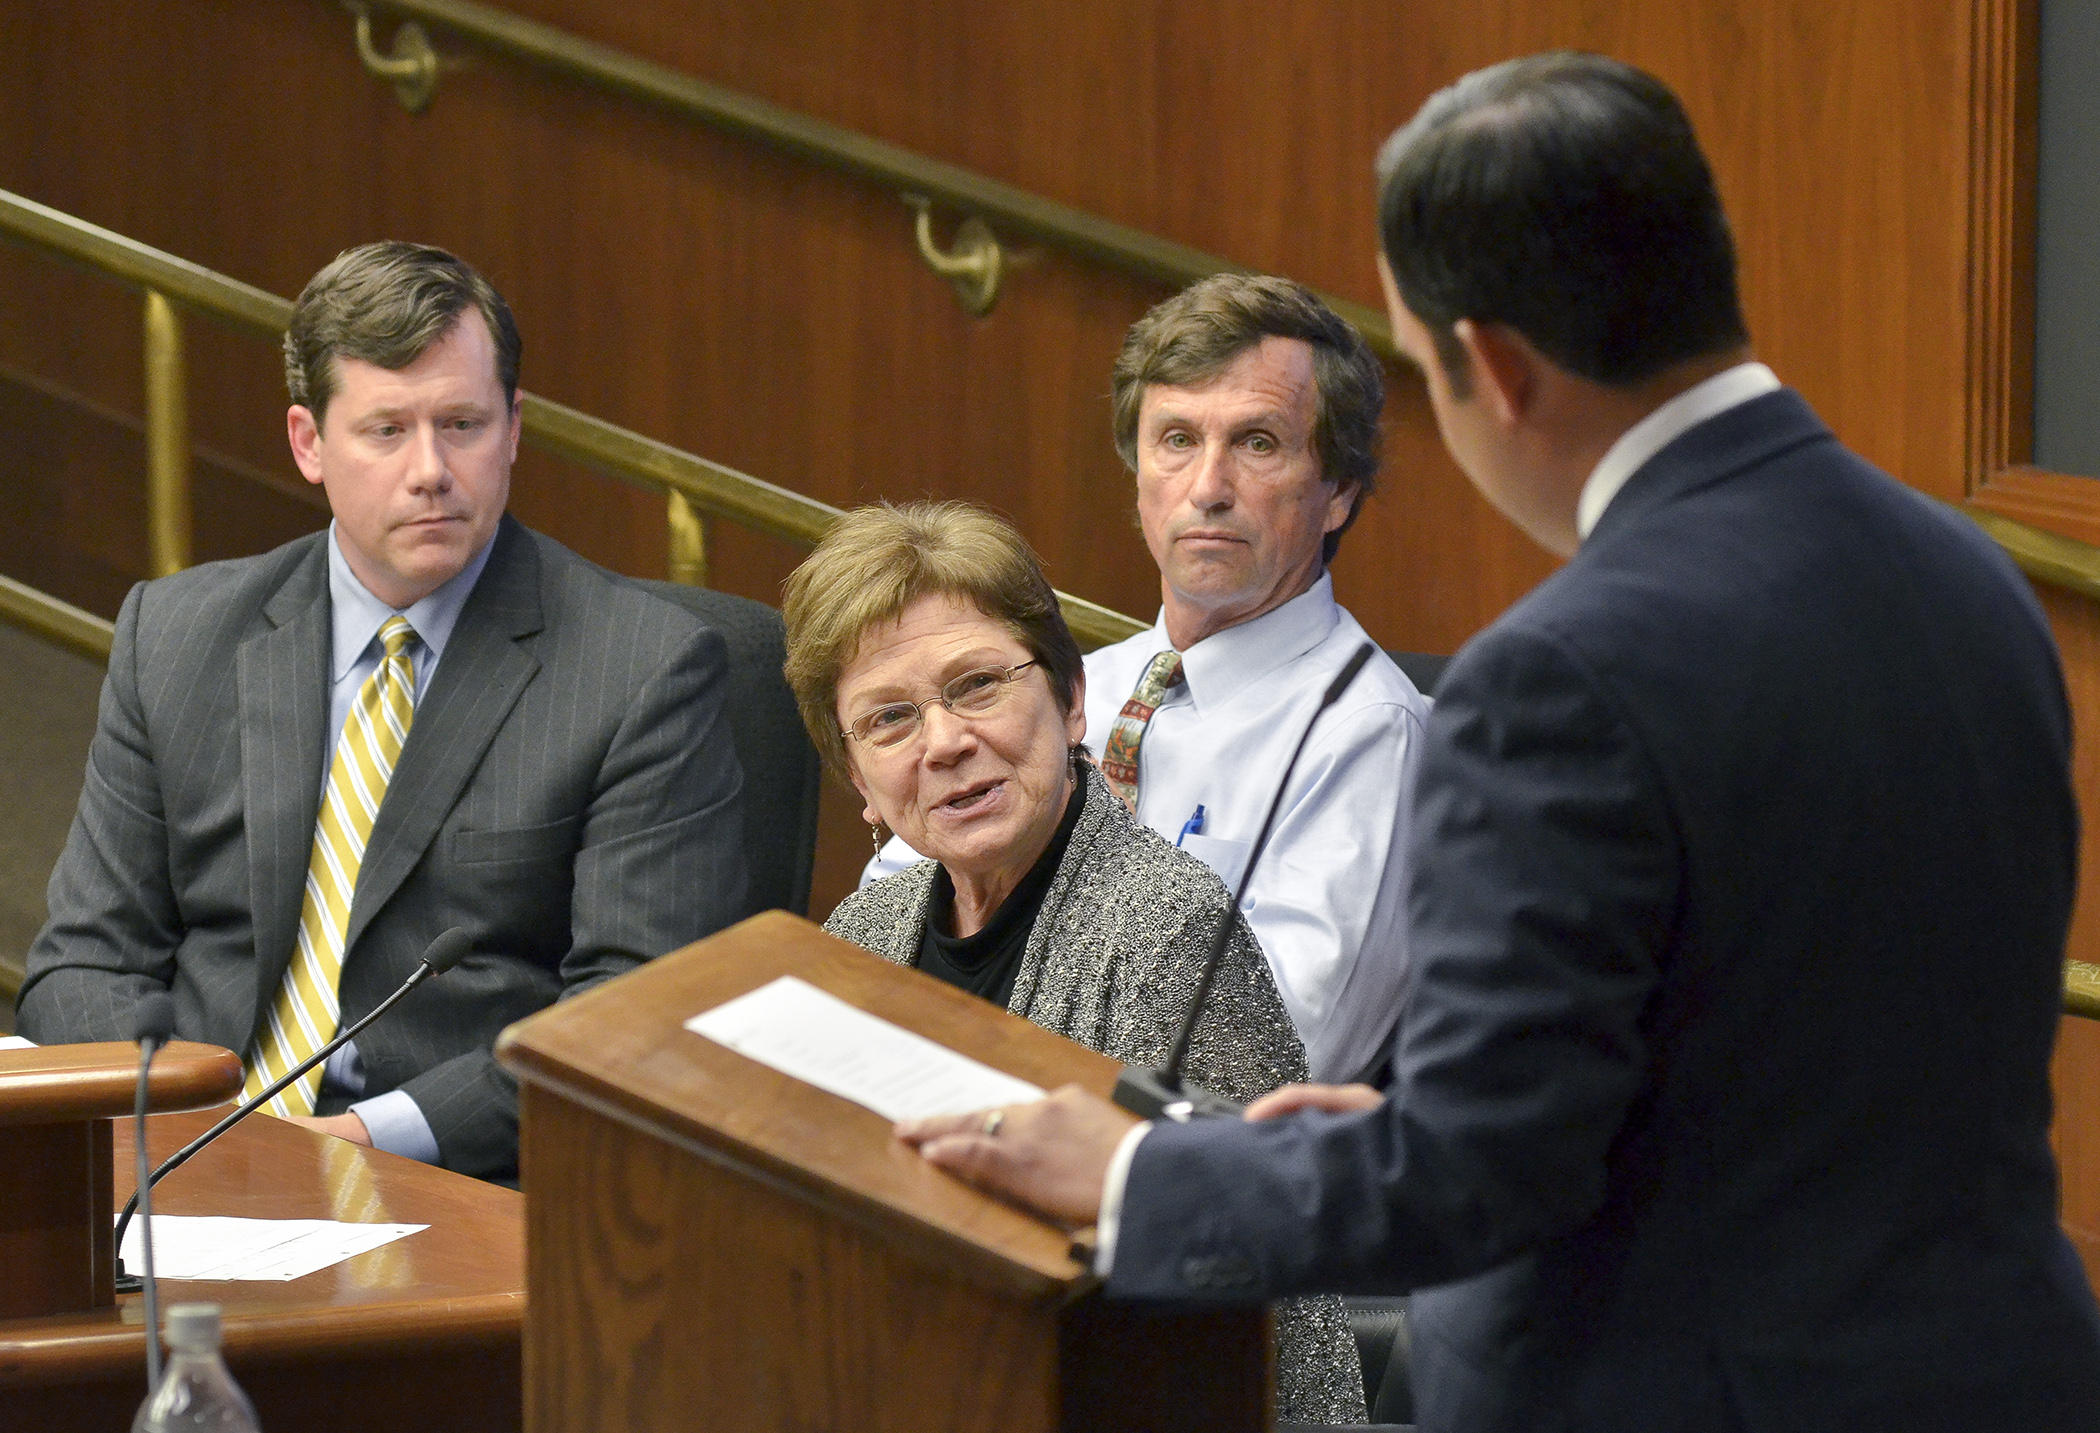 (Left to right) Rep. Dennis Smith, Rep. Alice Hauseman, Rep. Denny McNamara and Reid LeBeau, counsel to Rep. McNamara, testify before the House Ethics Committee June 30 during a probable cause hearing of an ethics complaint against McNamara. Photo by Andrew VonBank